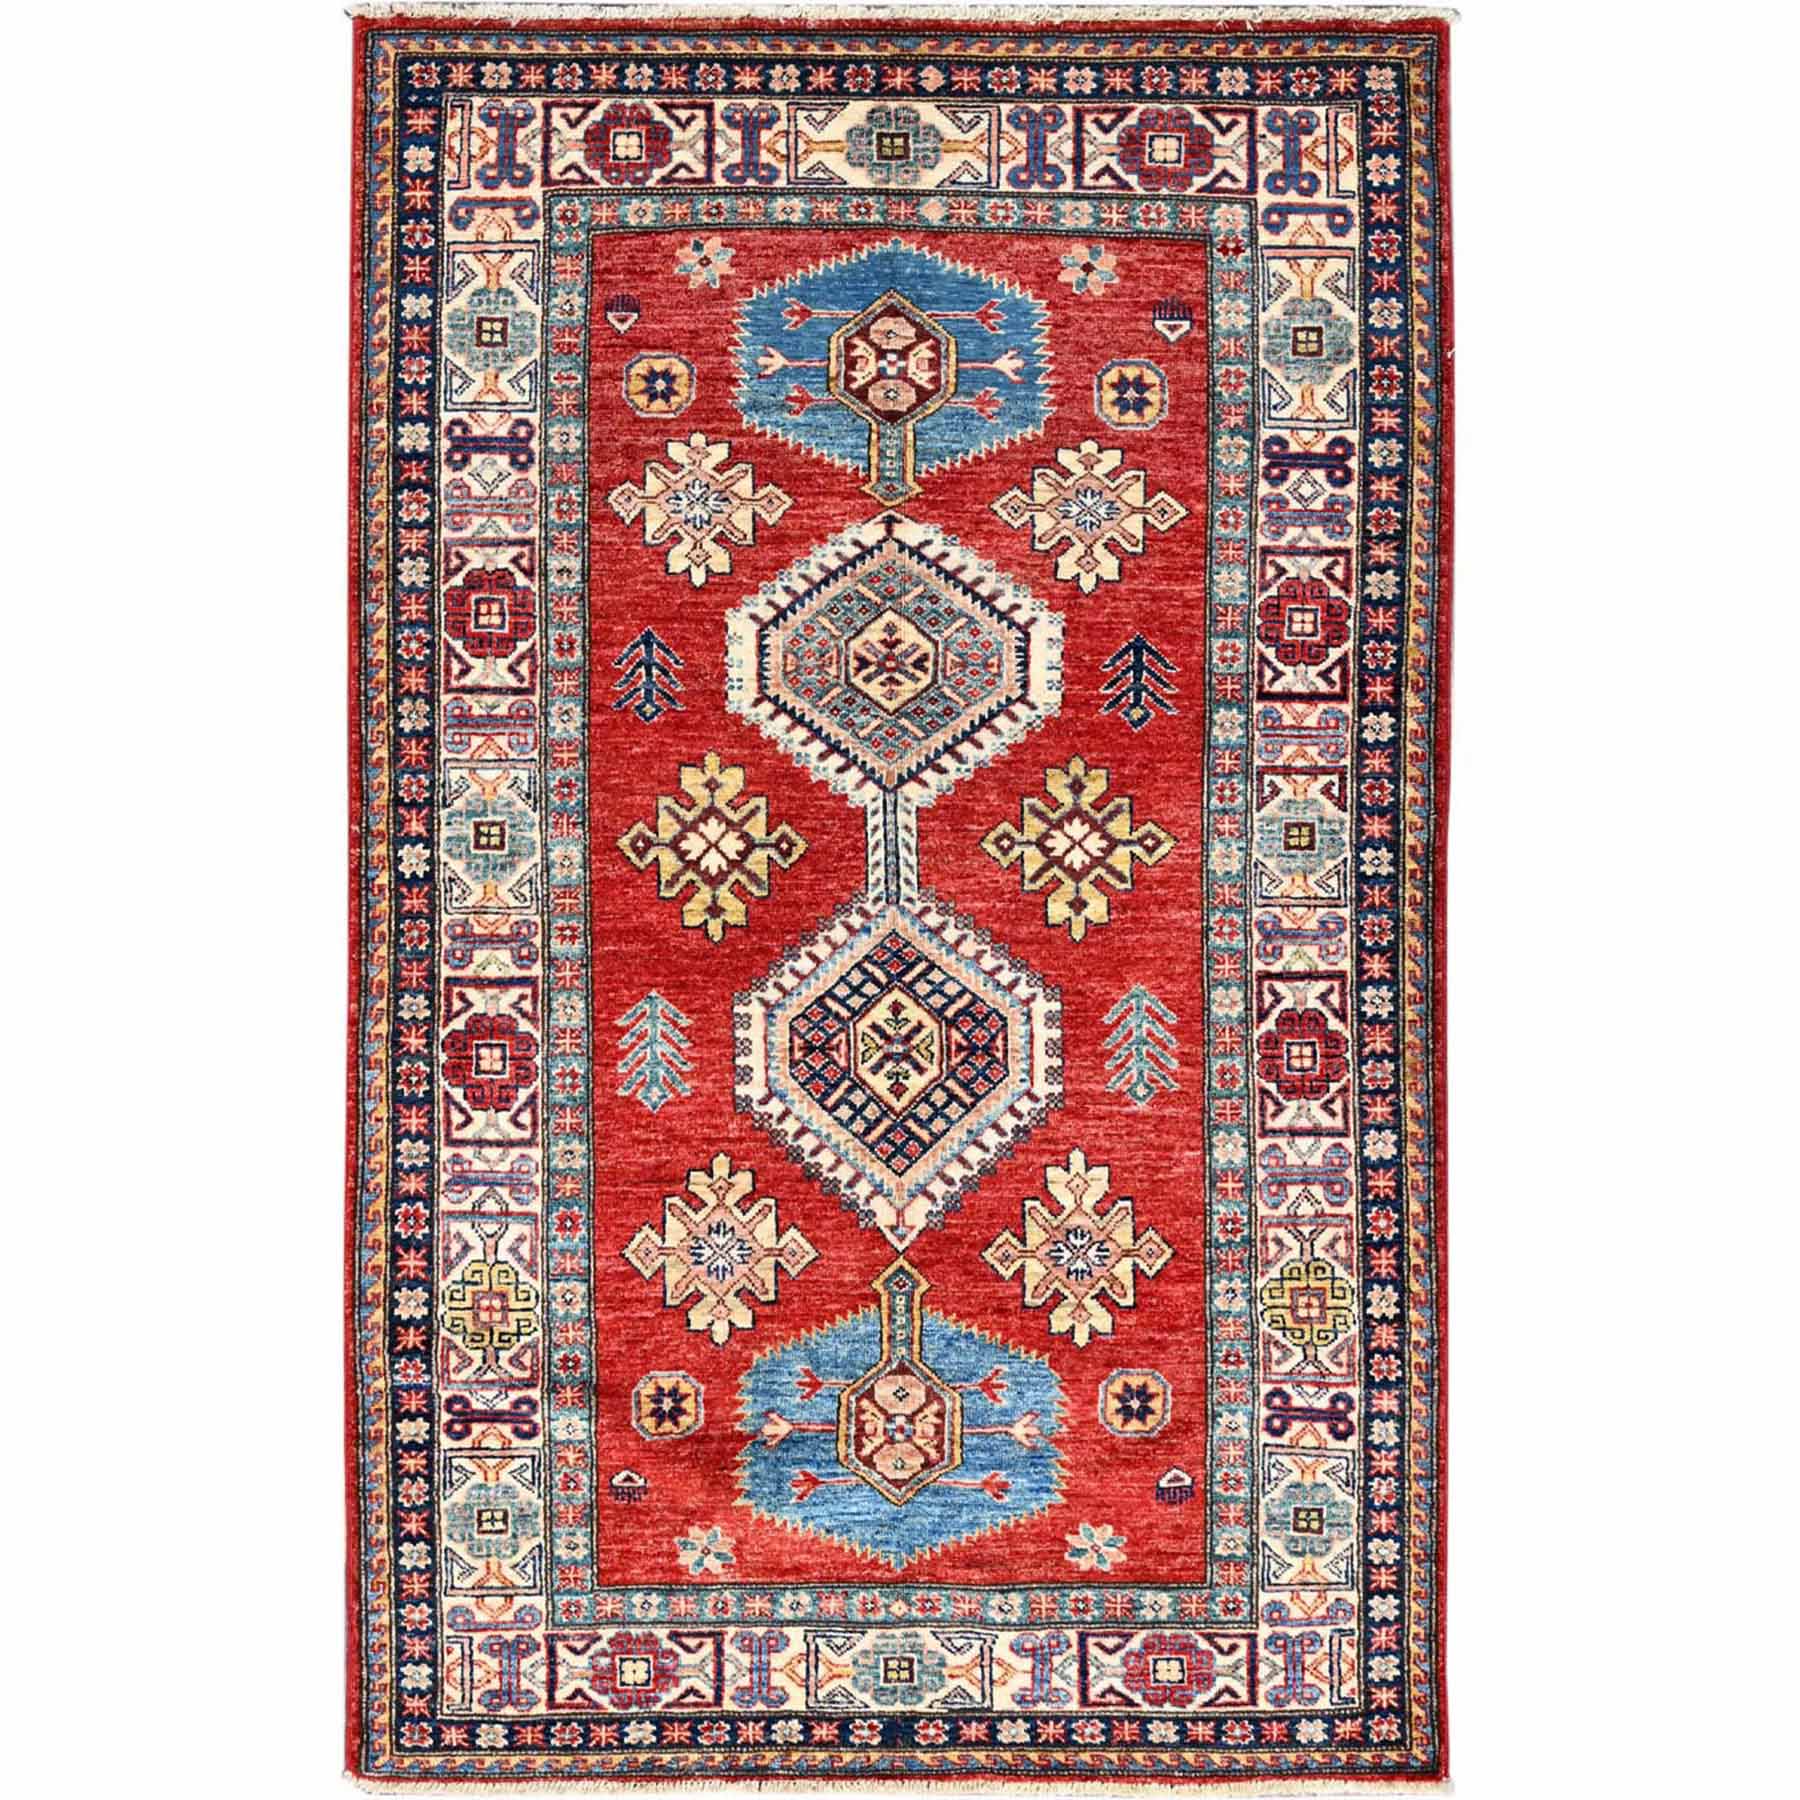 Lychee Red, Vegetable Dyes, Dense Weave Organic Wool, Hand Knotted Afghan Super Kazak with Tribal Geometric Medallions, Oriental 